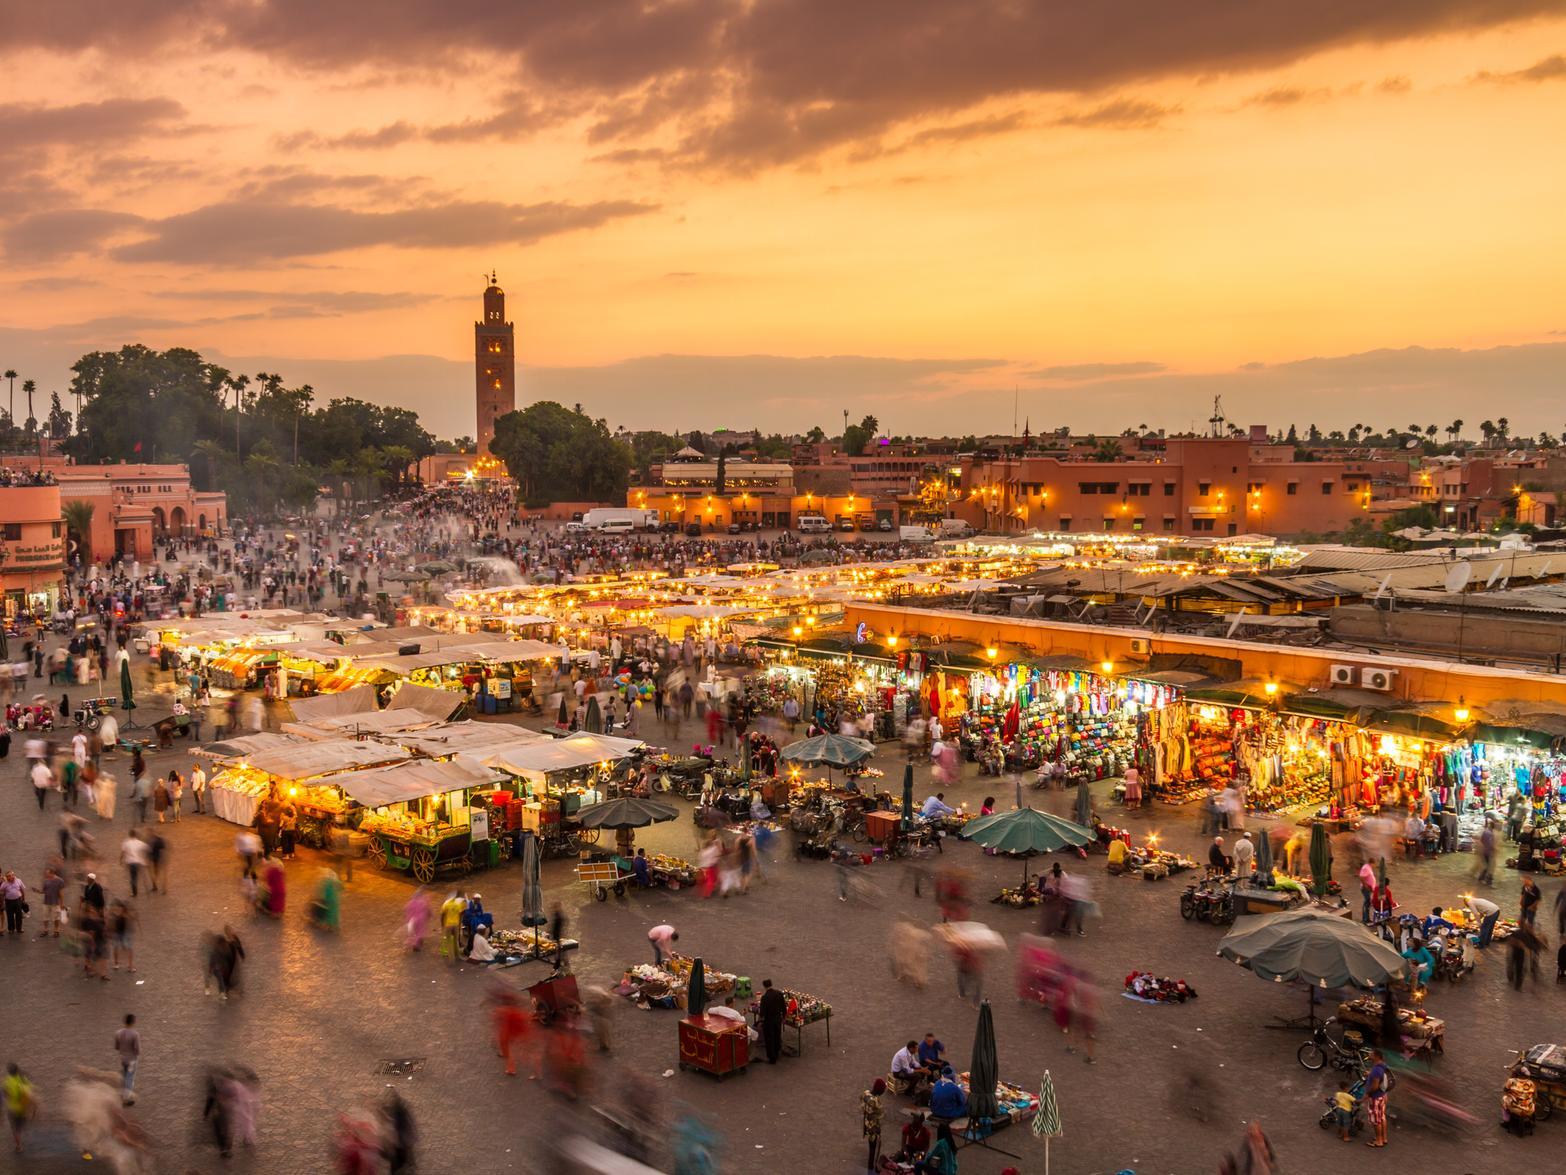 Marrakech proves popular with tourists all year round, and with highs of 25C in April, its a great place for a trip during the Easter holidays. With long hours of sunshine and plenty to explore, Marrakech could be a great choice.